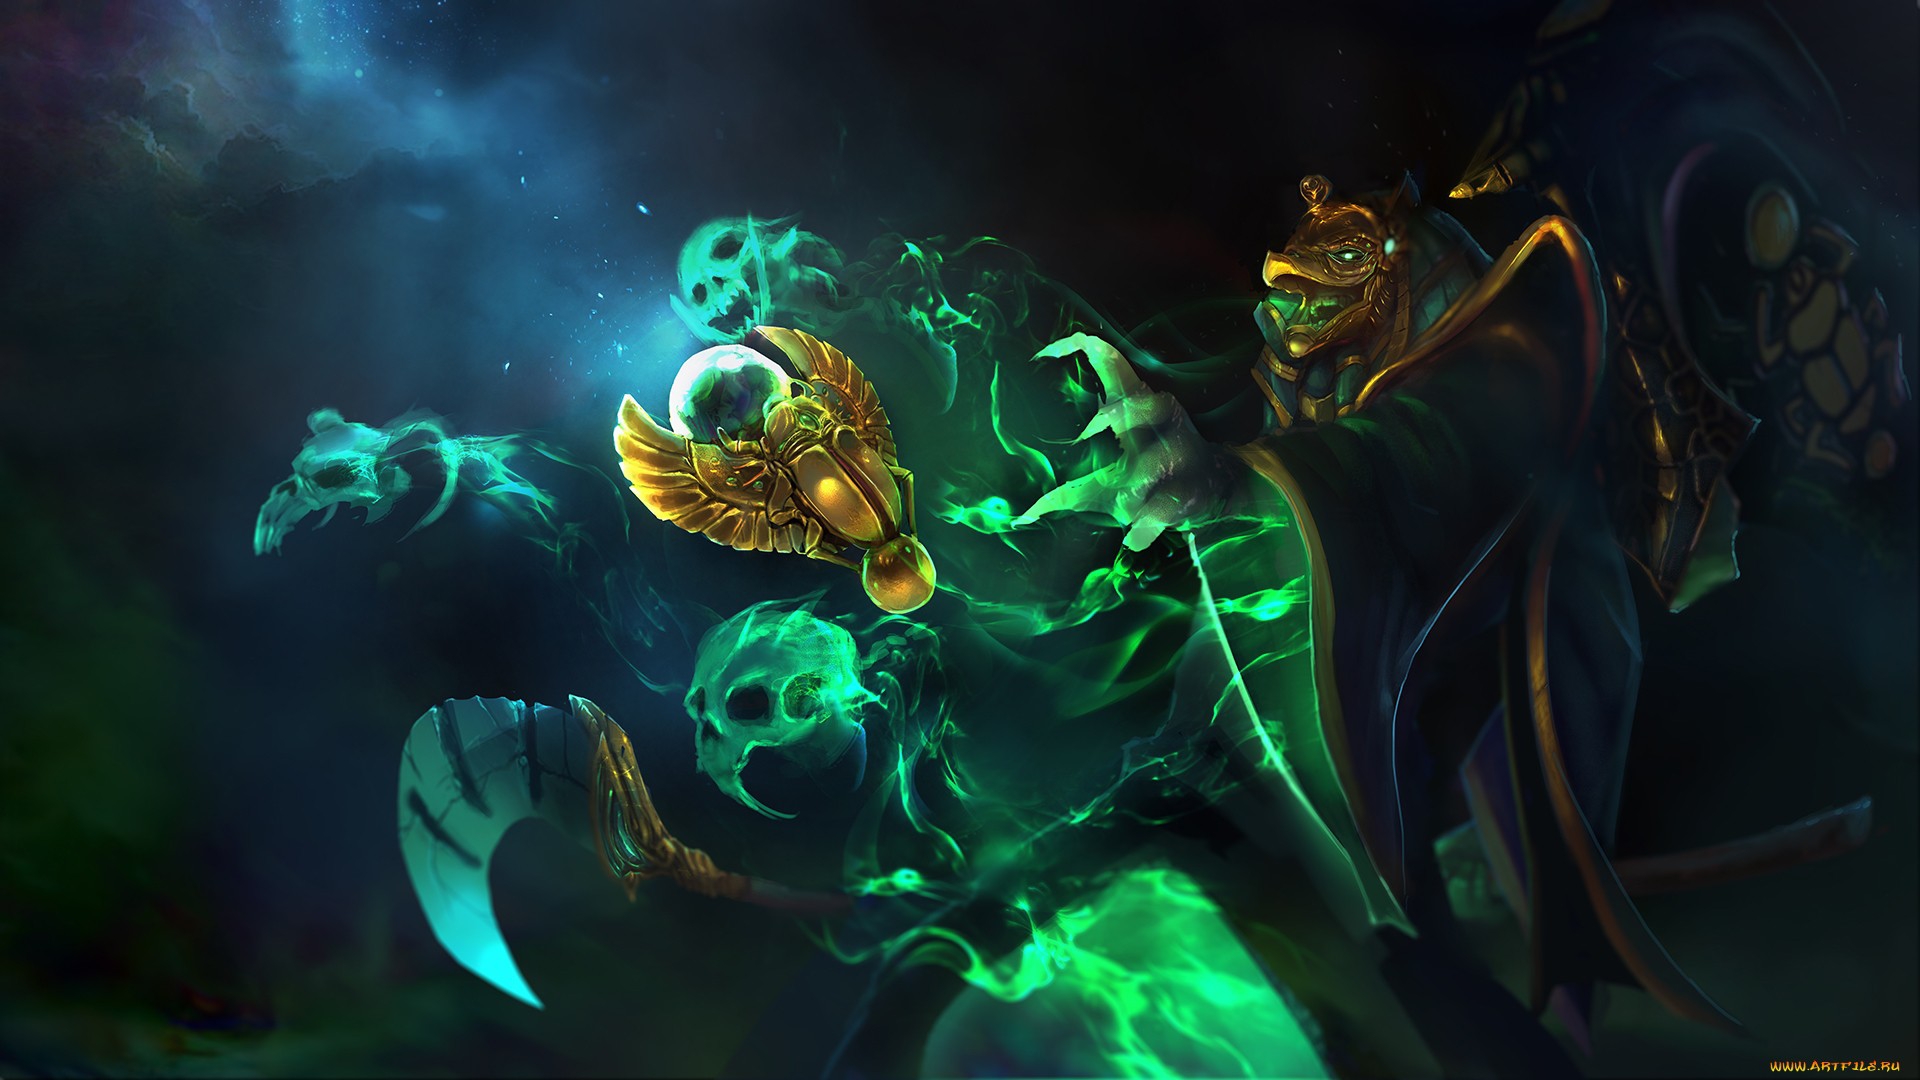 The Best Dota 2 Background for Your PC in 2022